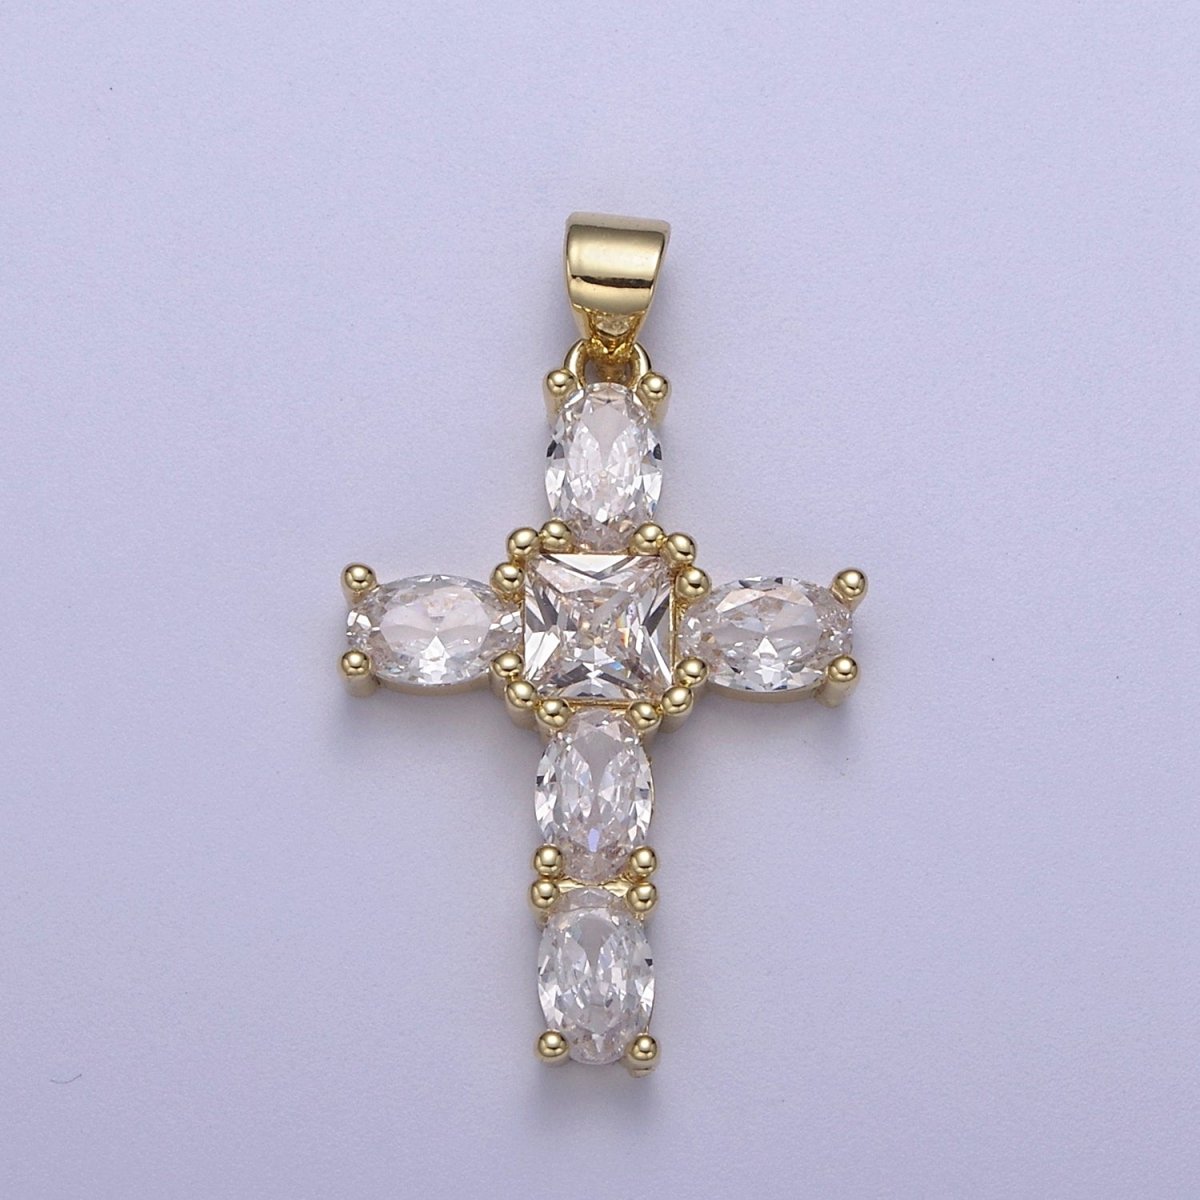 Cubic Zirconia Cross Pendant 14K Gold Filled Cross charm for Religious jewelry Making H-400 - DLUXCA